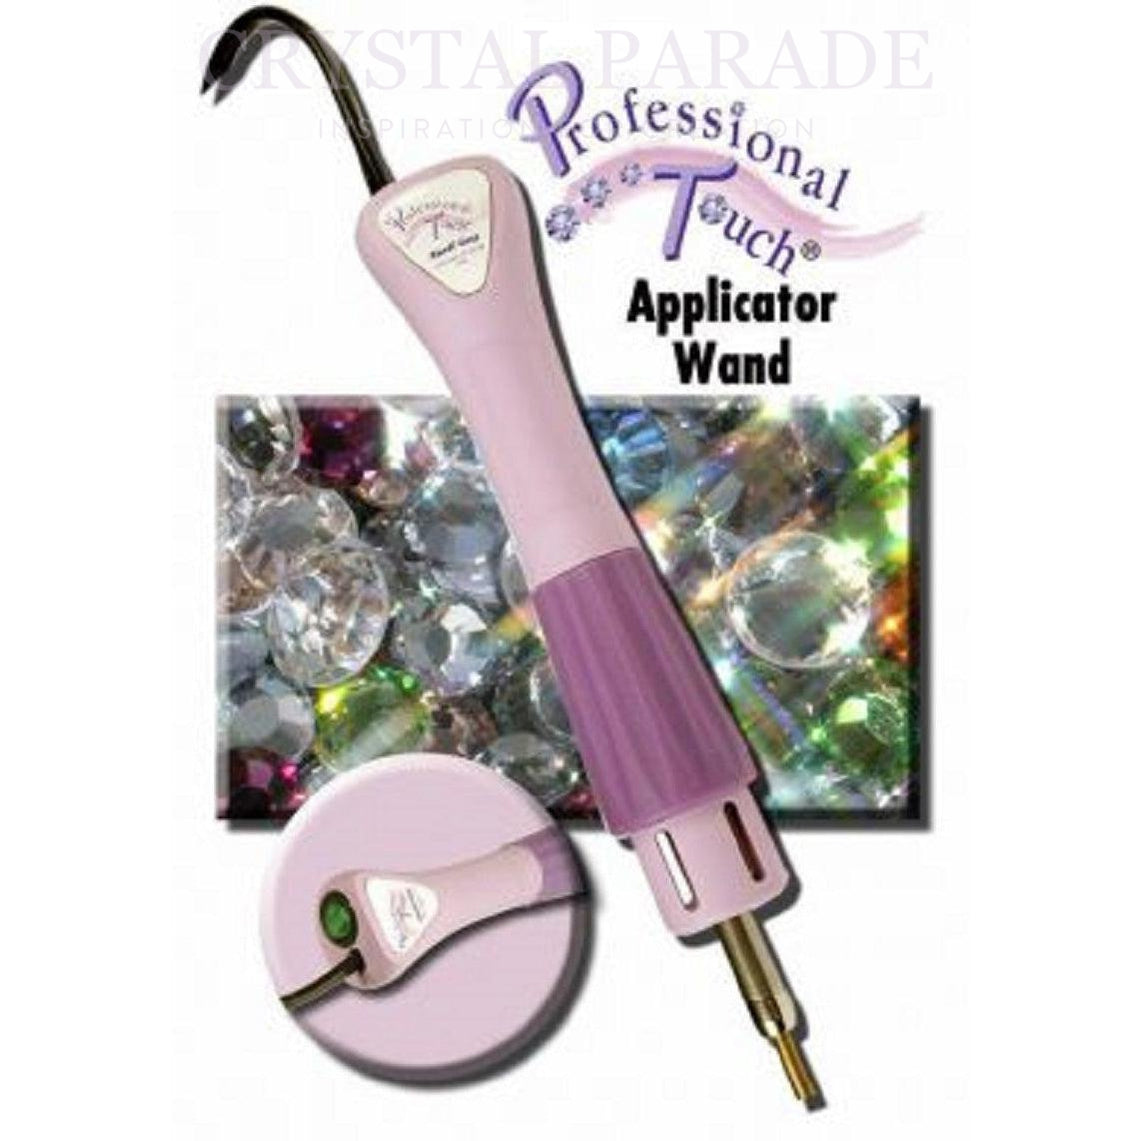 Kandi Kane Professional: This is a great all around tool for hot